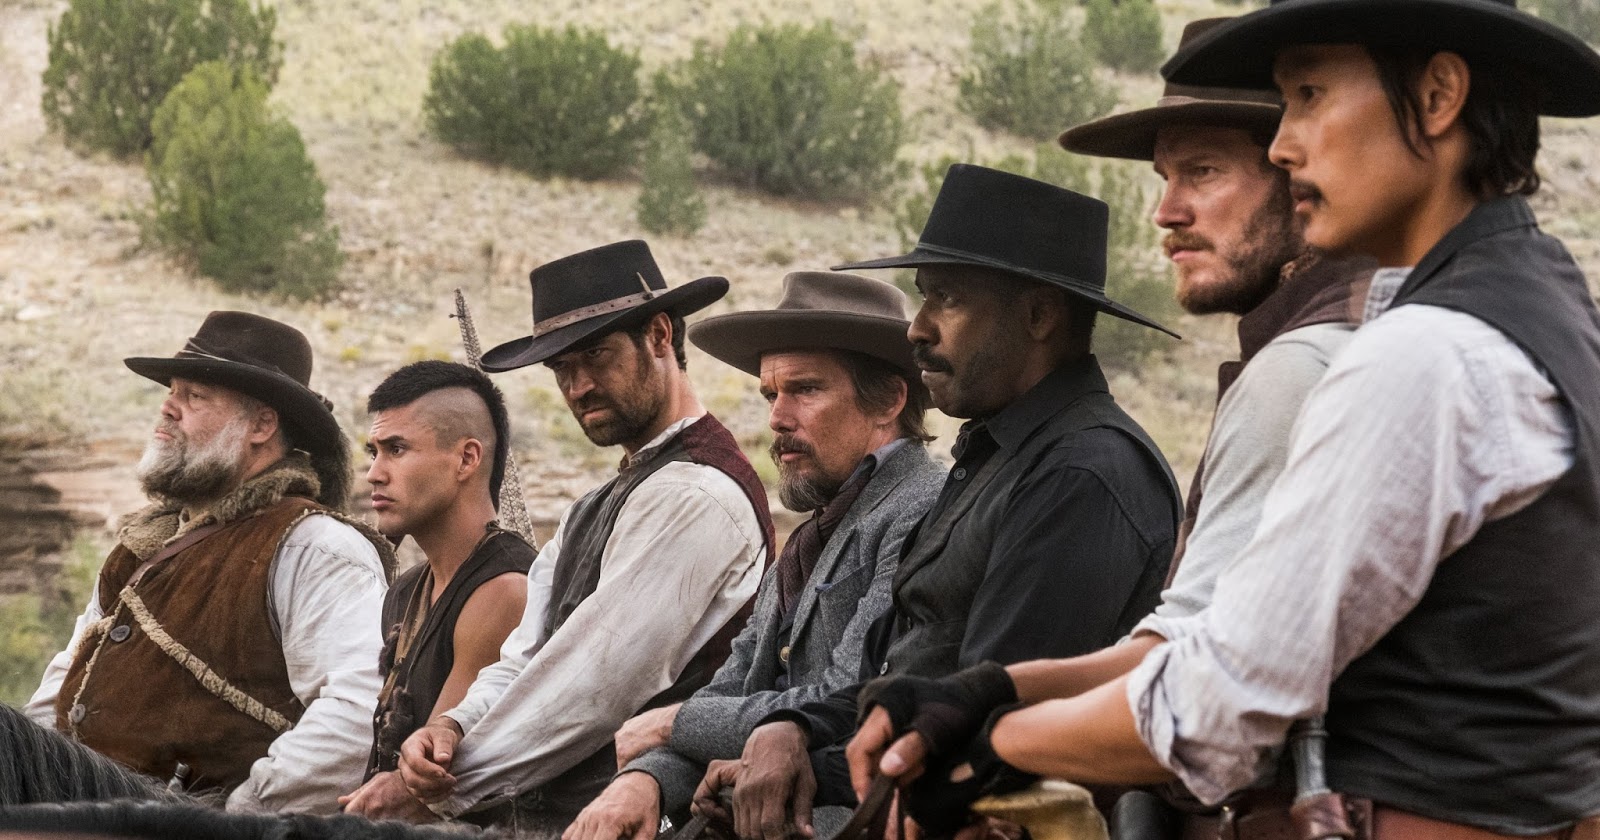 MOVIES: The Magnificent Seven - Review